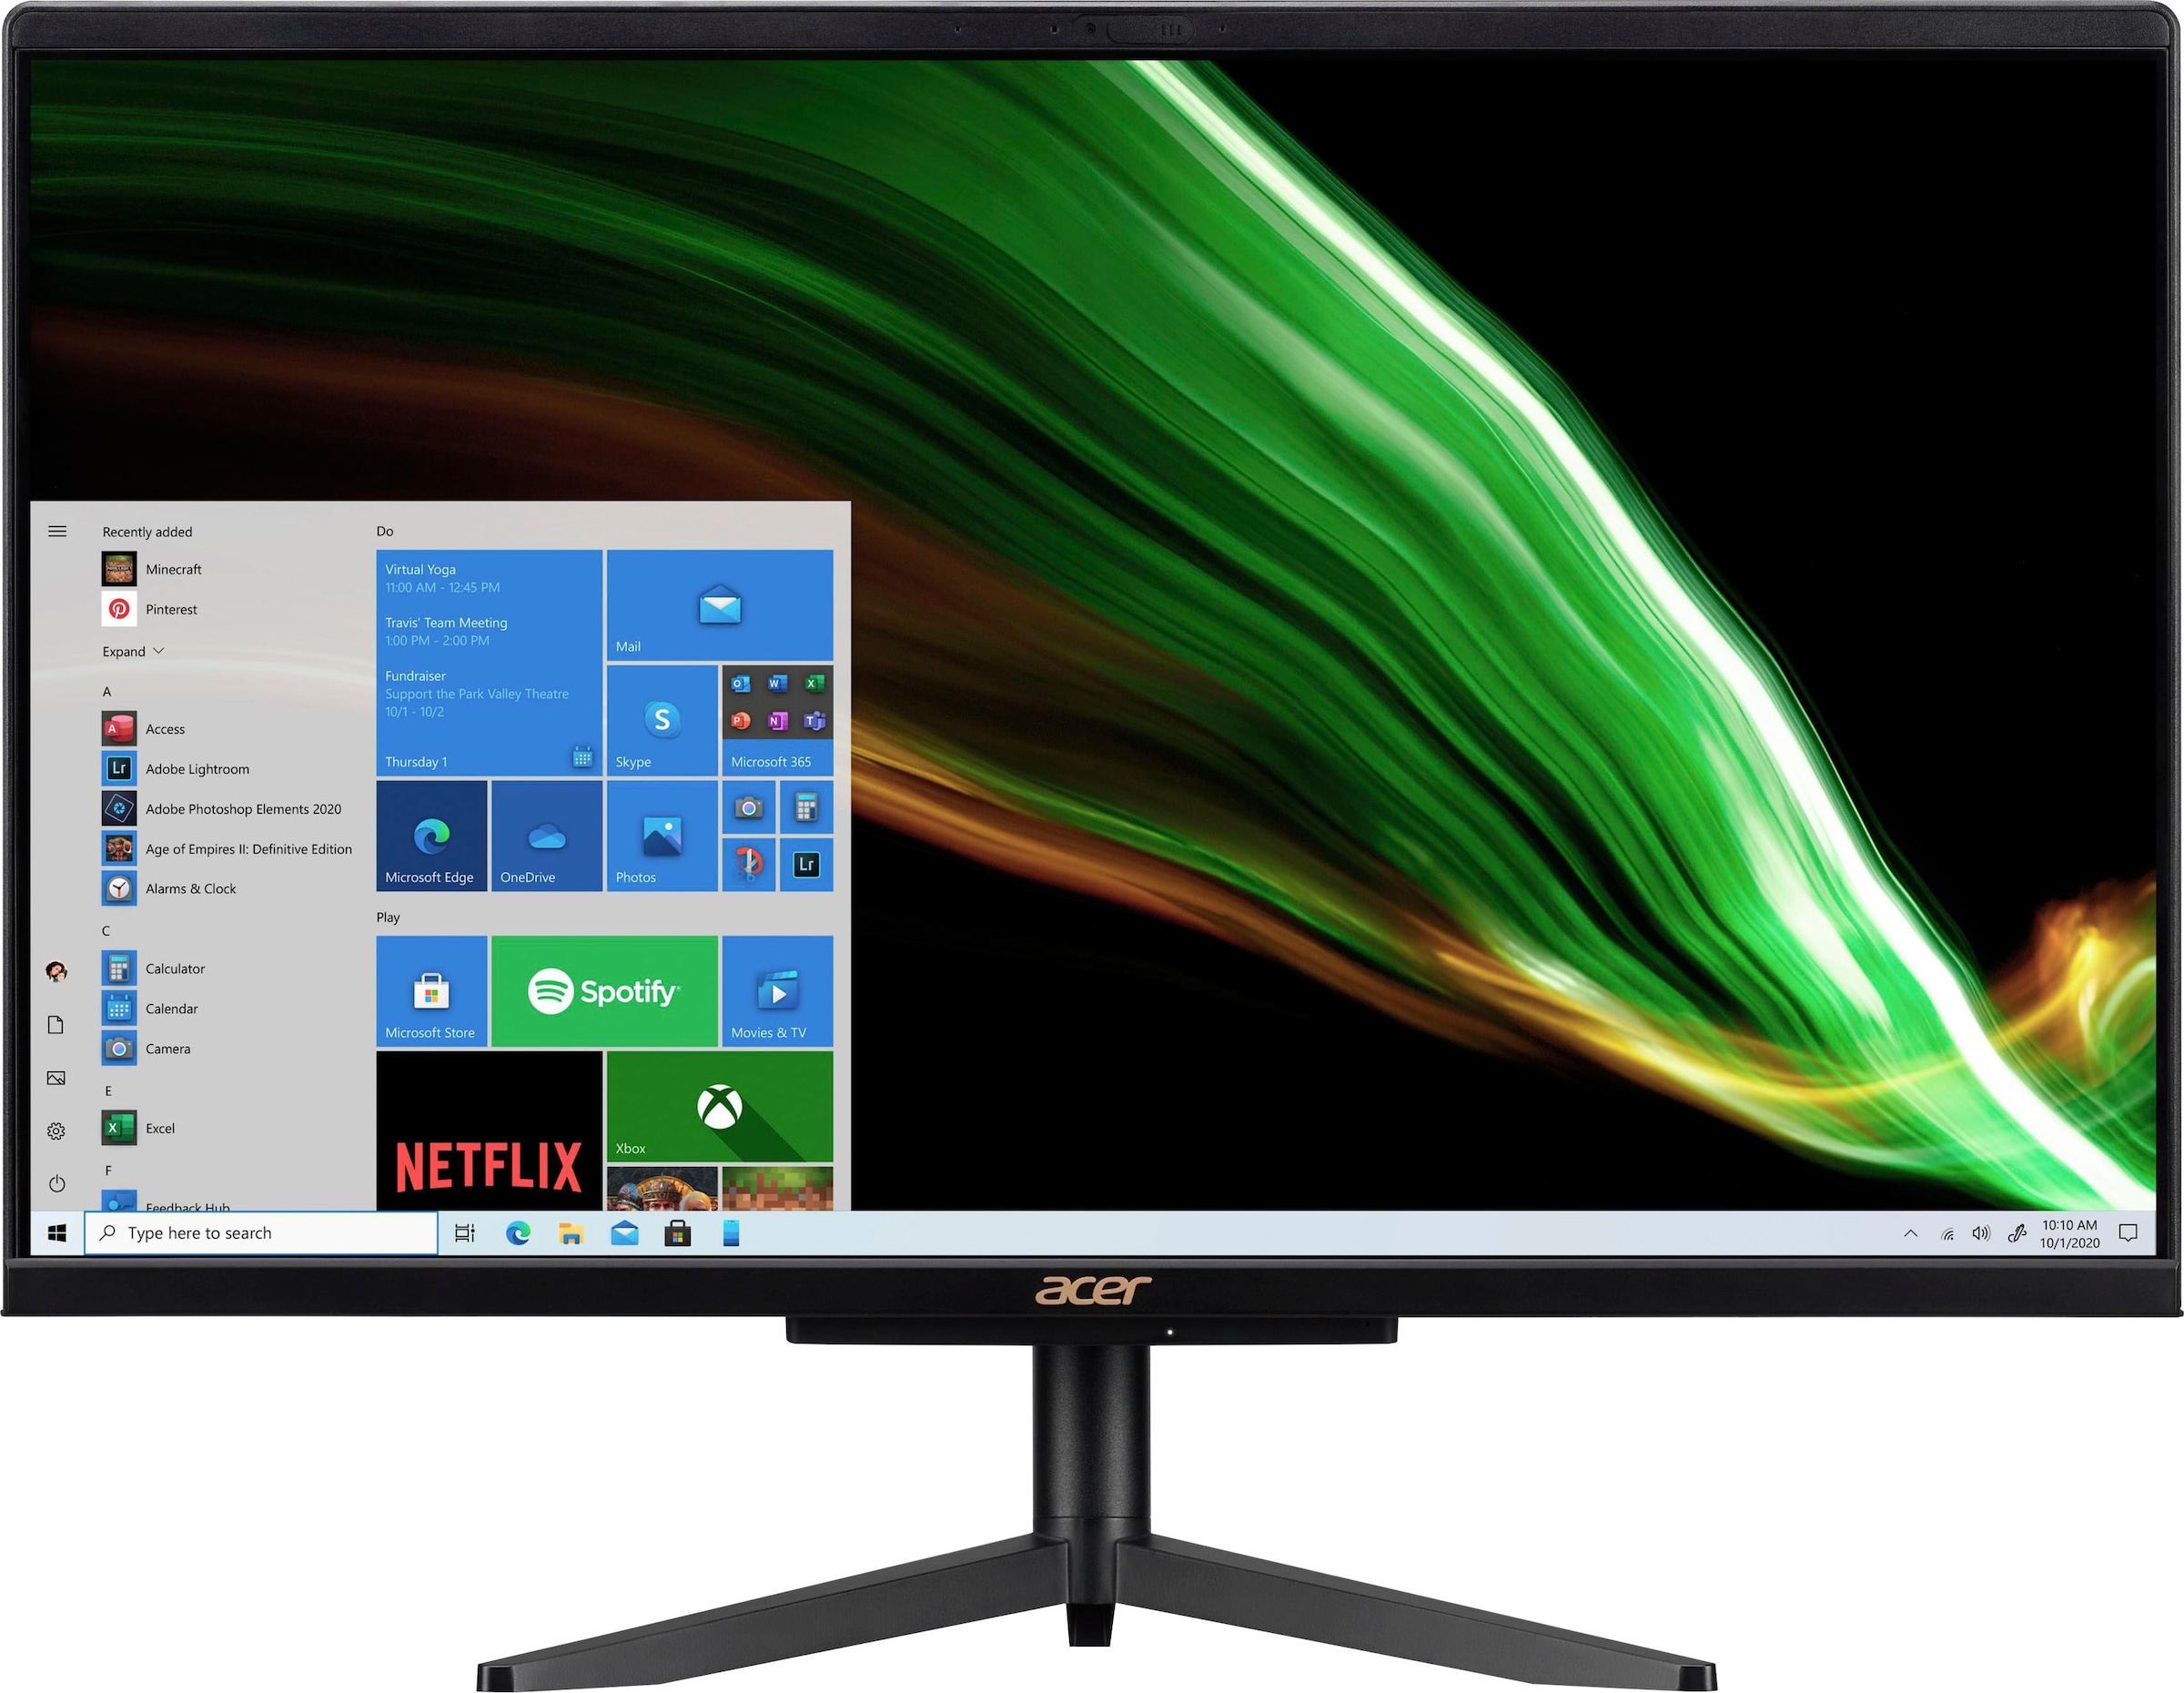 All-in-One »Aspire C24-1600« PC Acer | BAUR